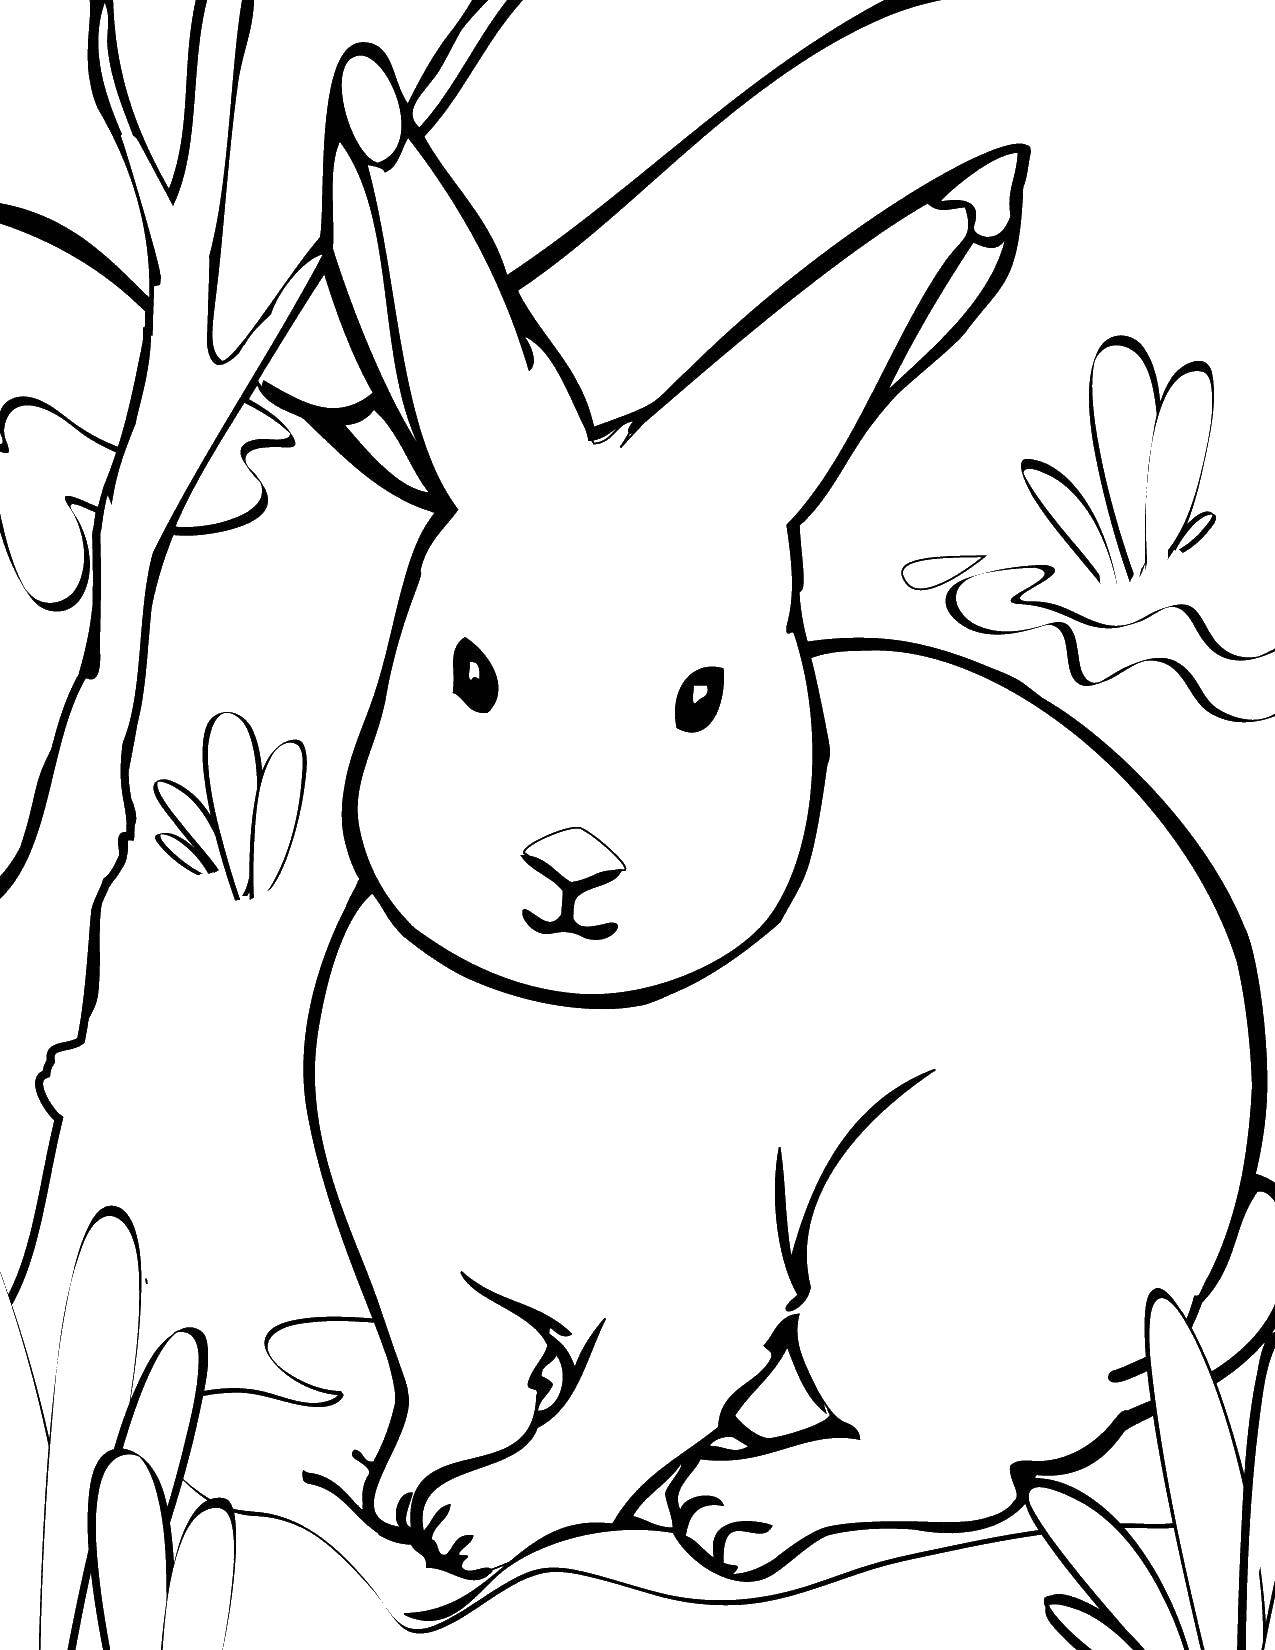 Coloring Eared Bunny. Category Wild animals. Tags:  Animals, Bunny.